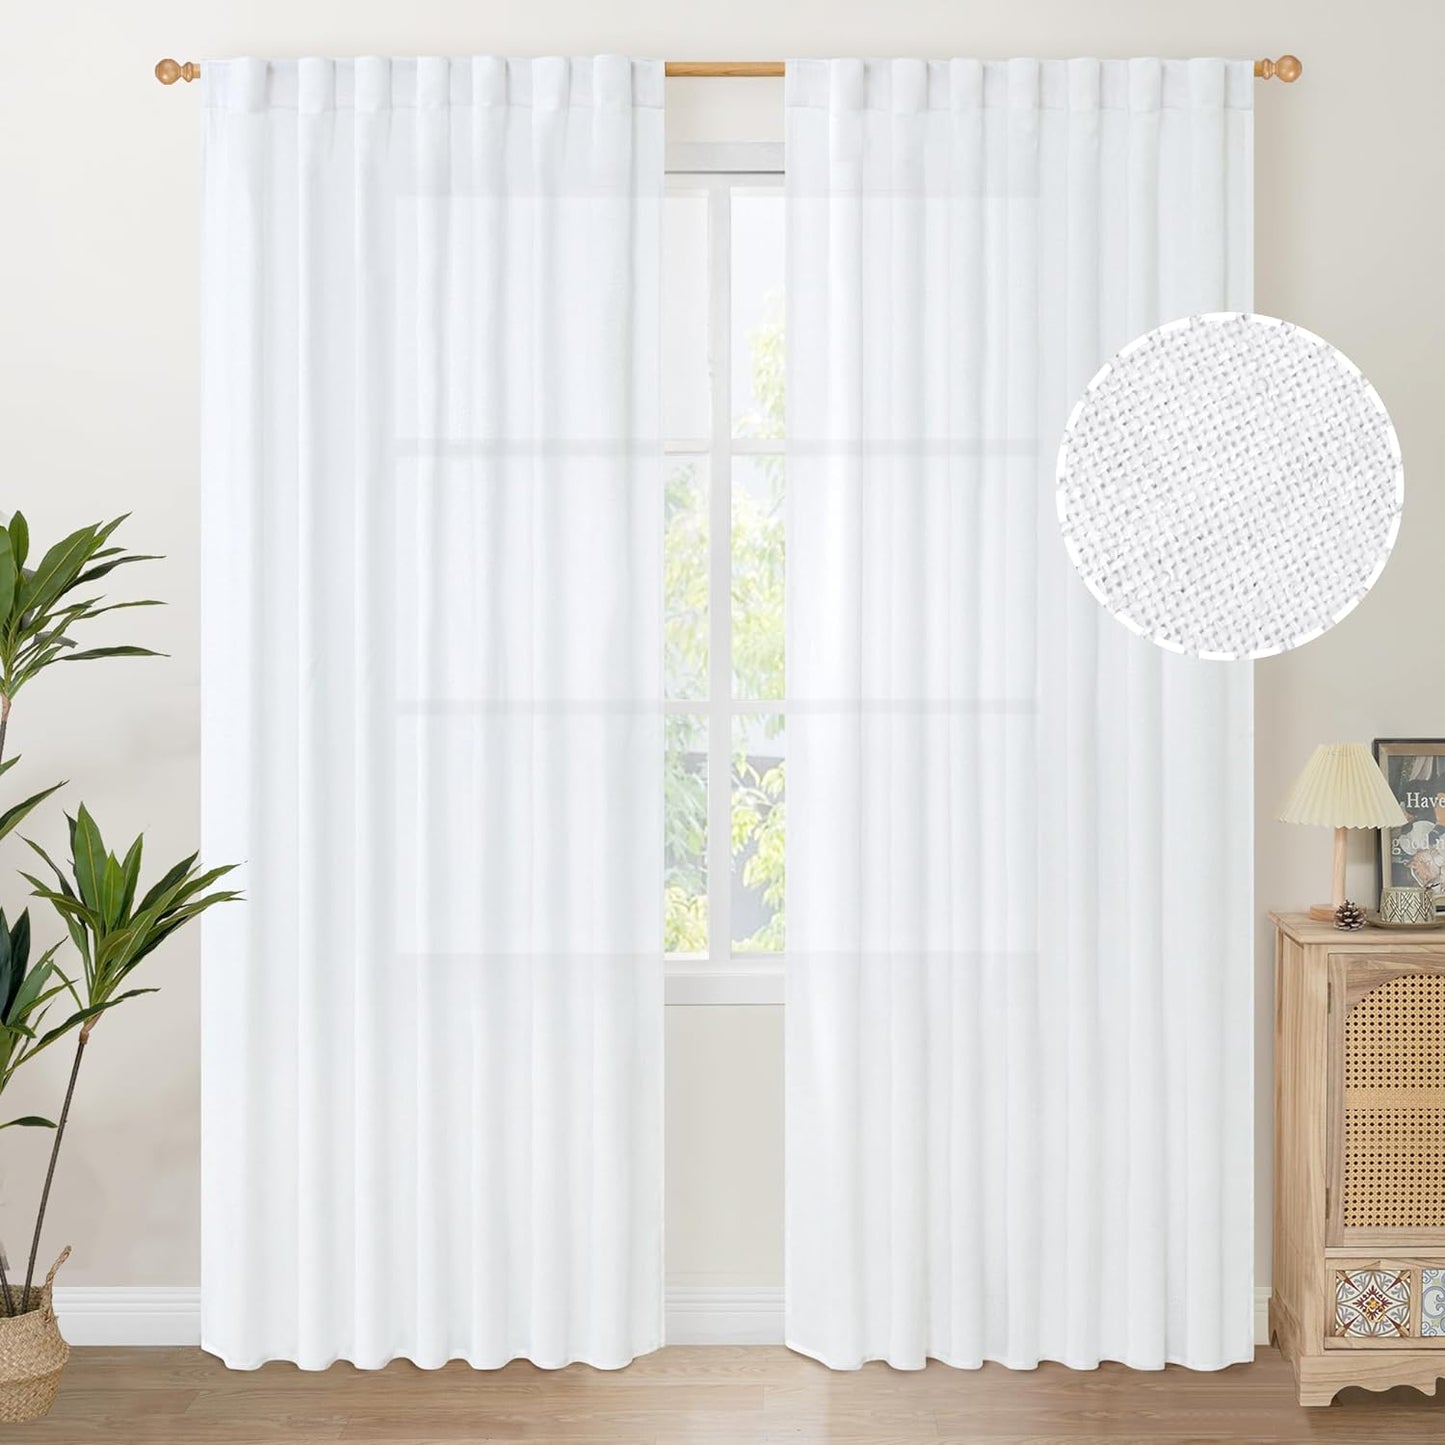 Youngstex Natural Linen Curtains 72 Inch Length 2 Panels for Living Room Light Filtering Textured Window Drapes for Bedroom Dining Office Back Tab Rod Pocket, 52 X 72 Inch  YoungsTex White 60W X 84L 